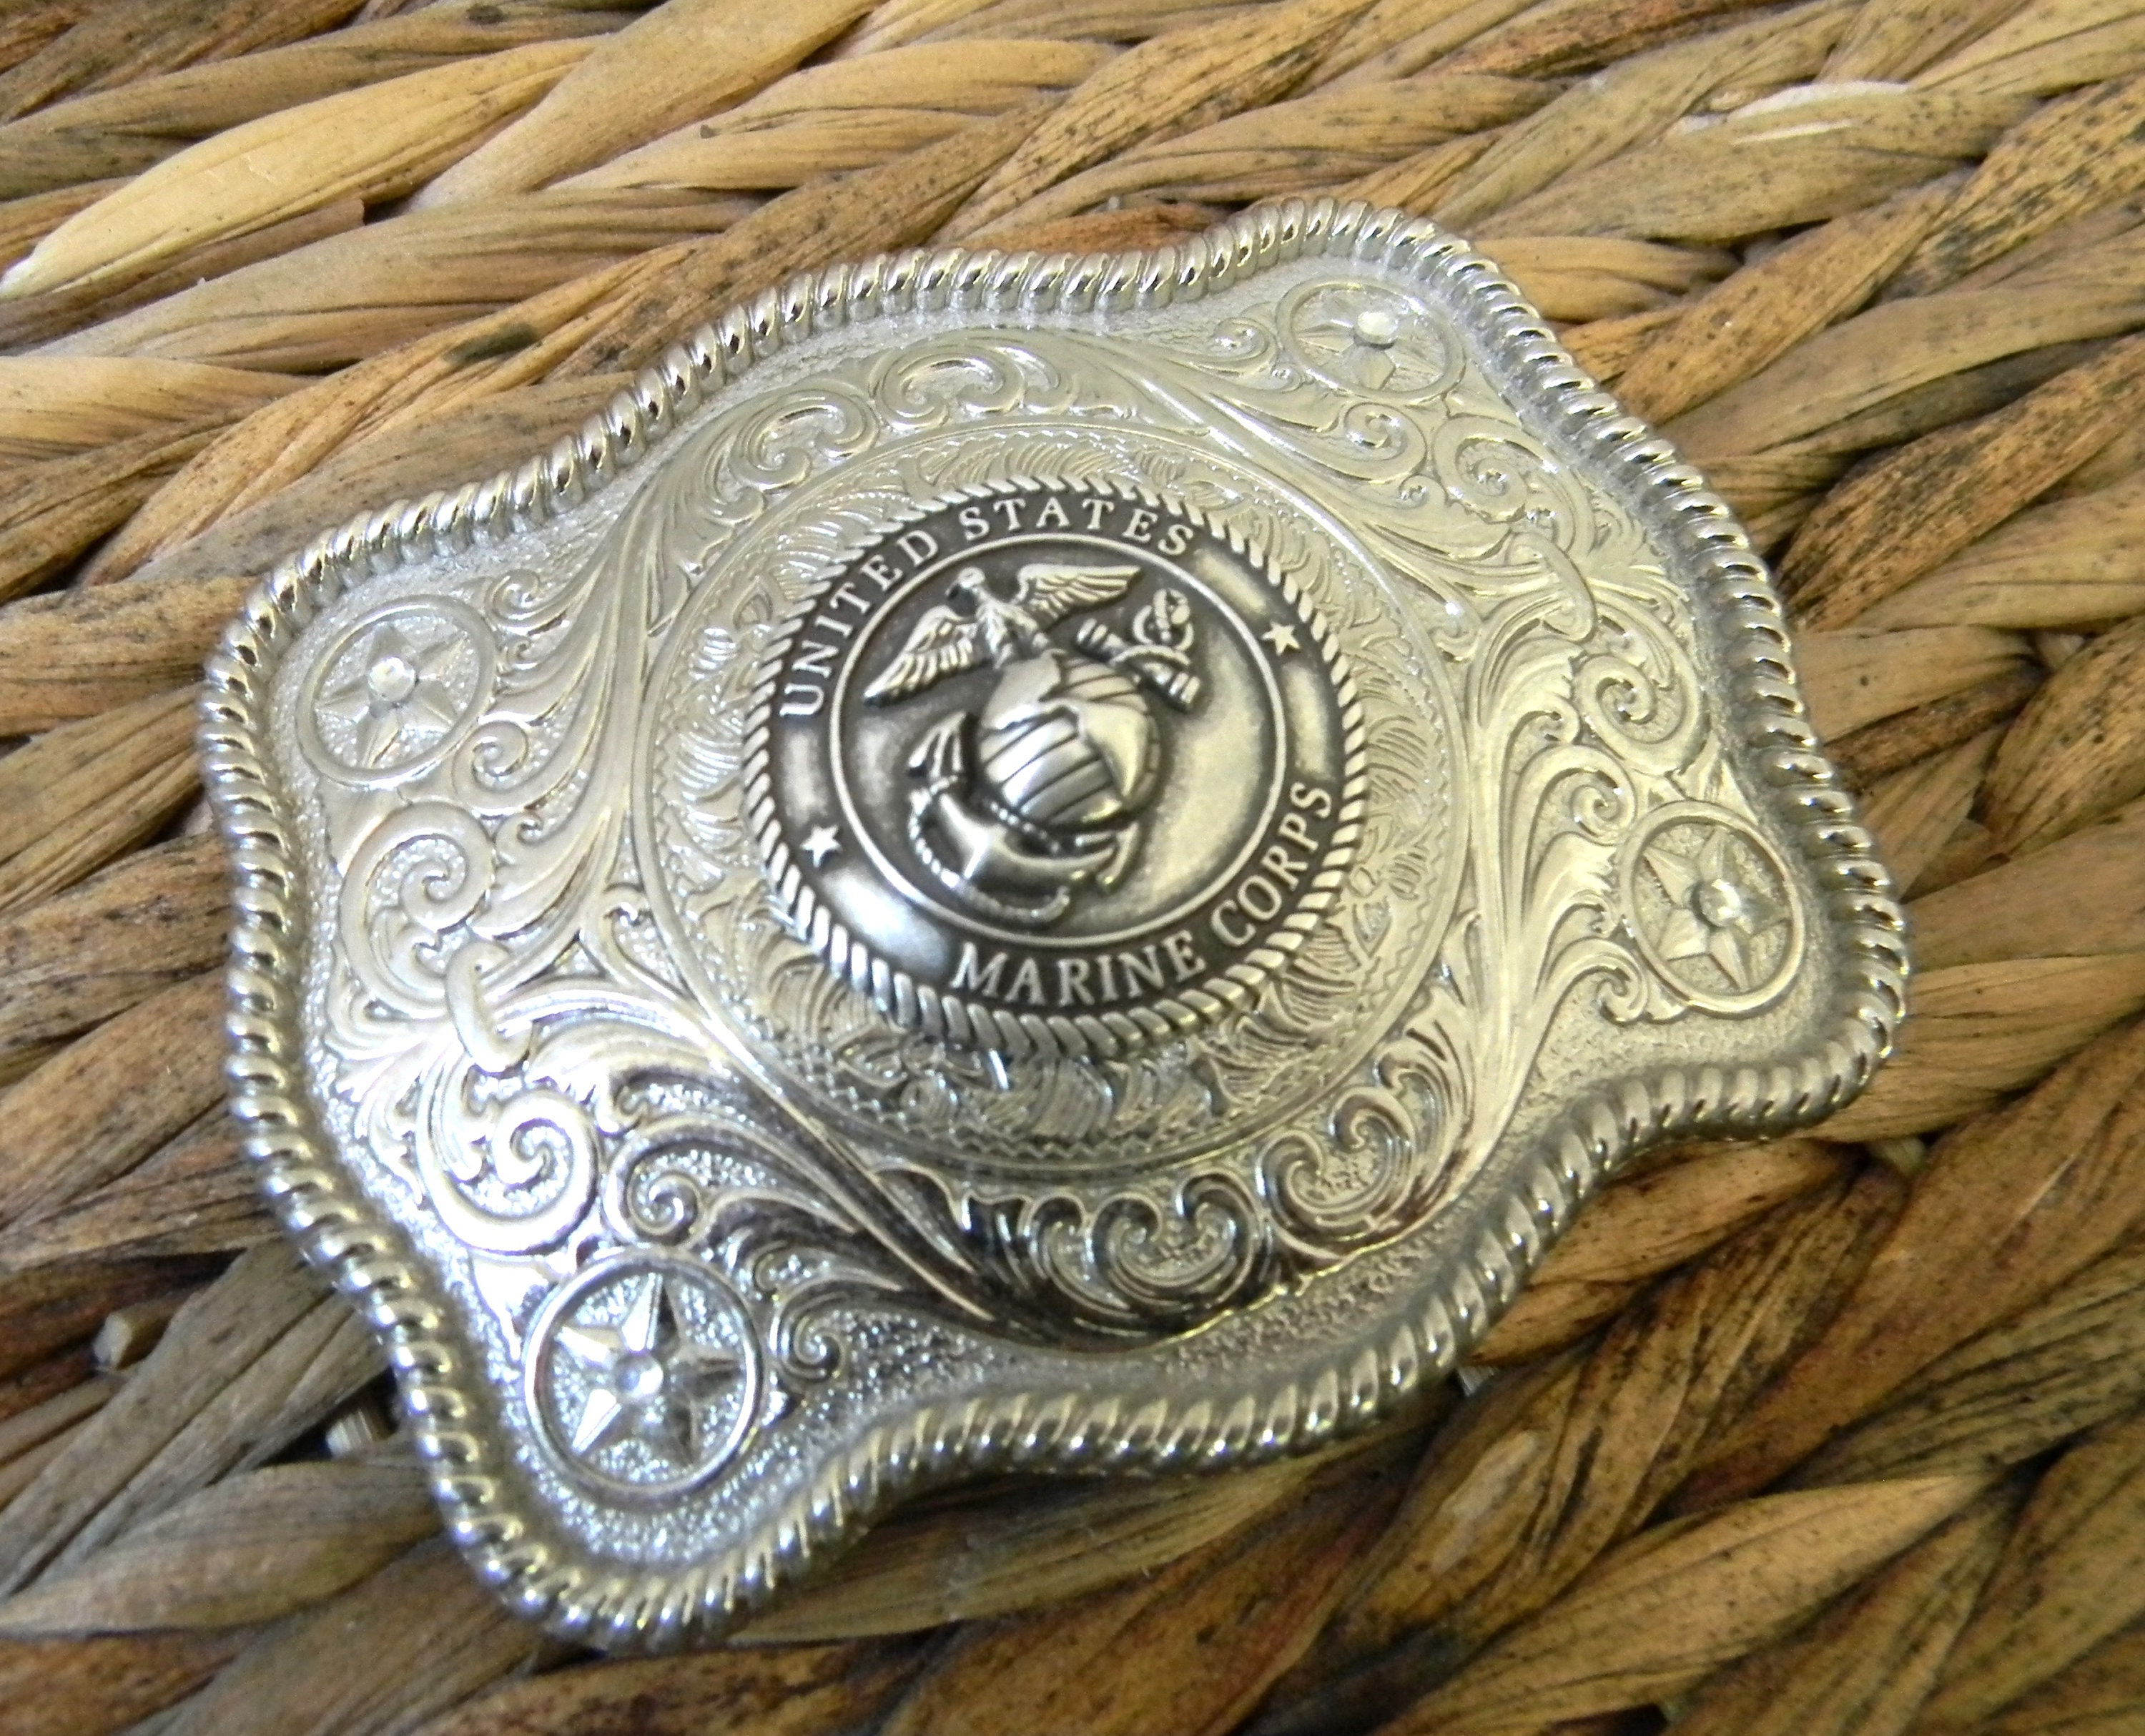 Western Cowboy Jewelry Bright Silver Engraved Gold Star Concho Key Ring Kit 